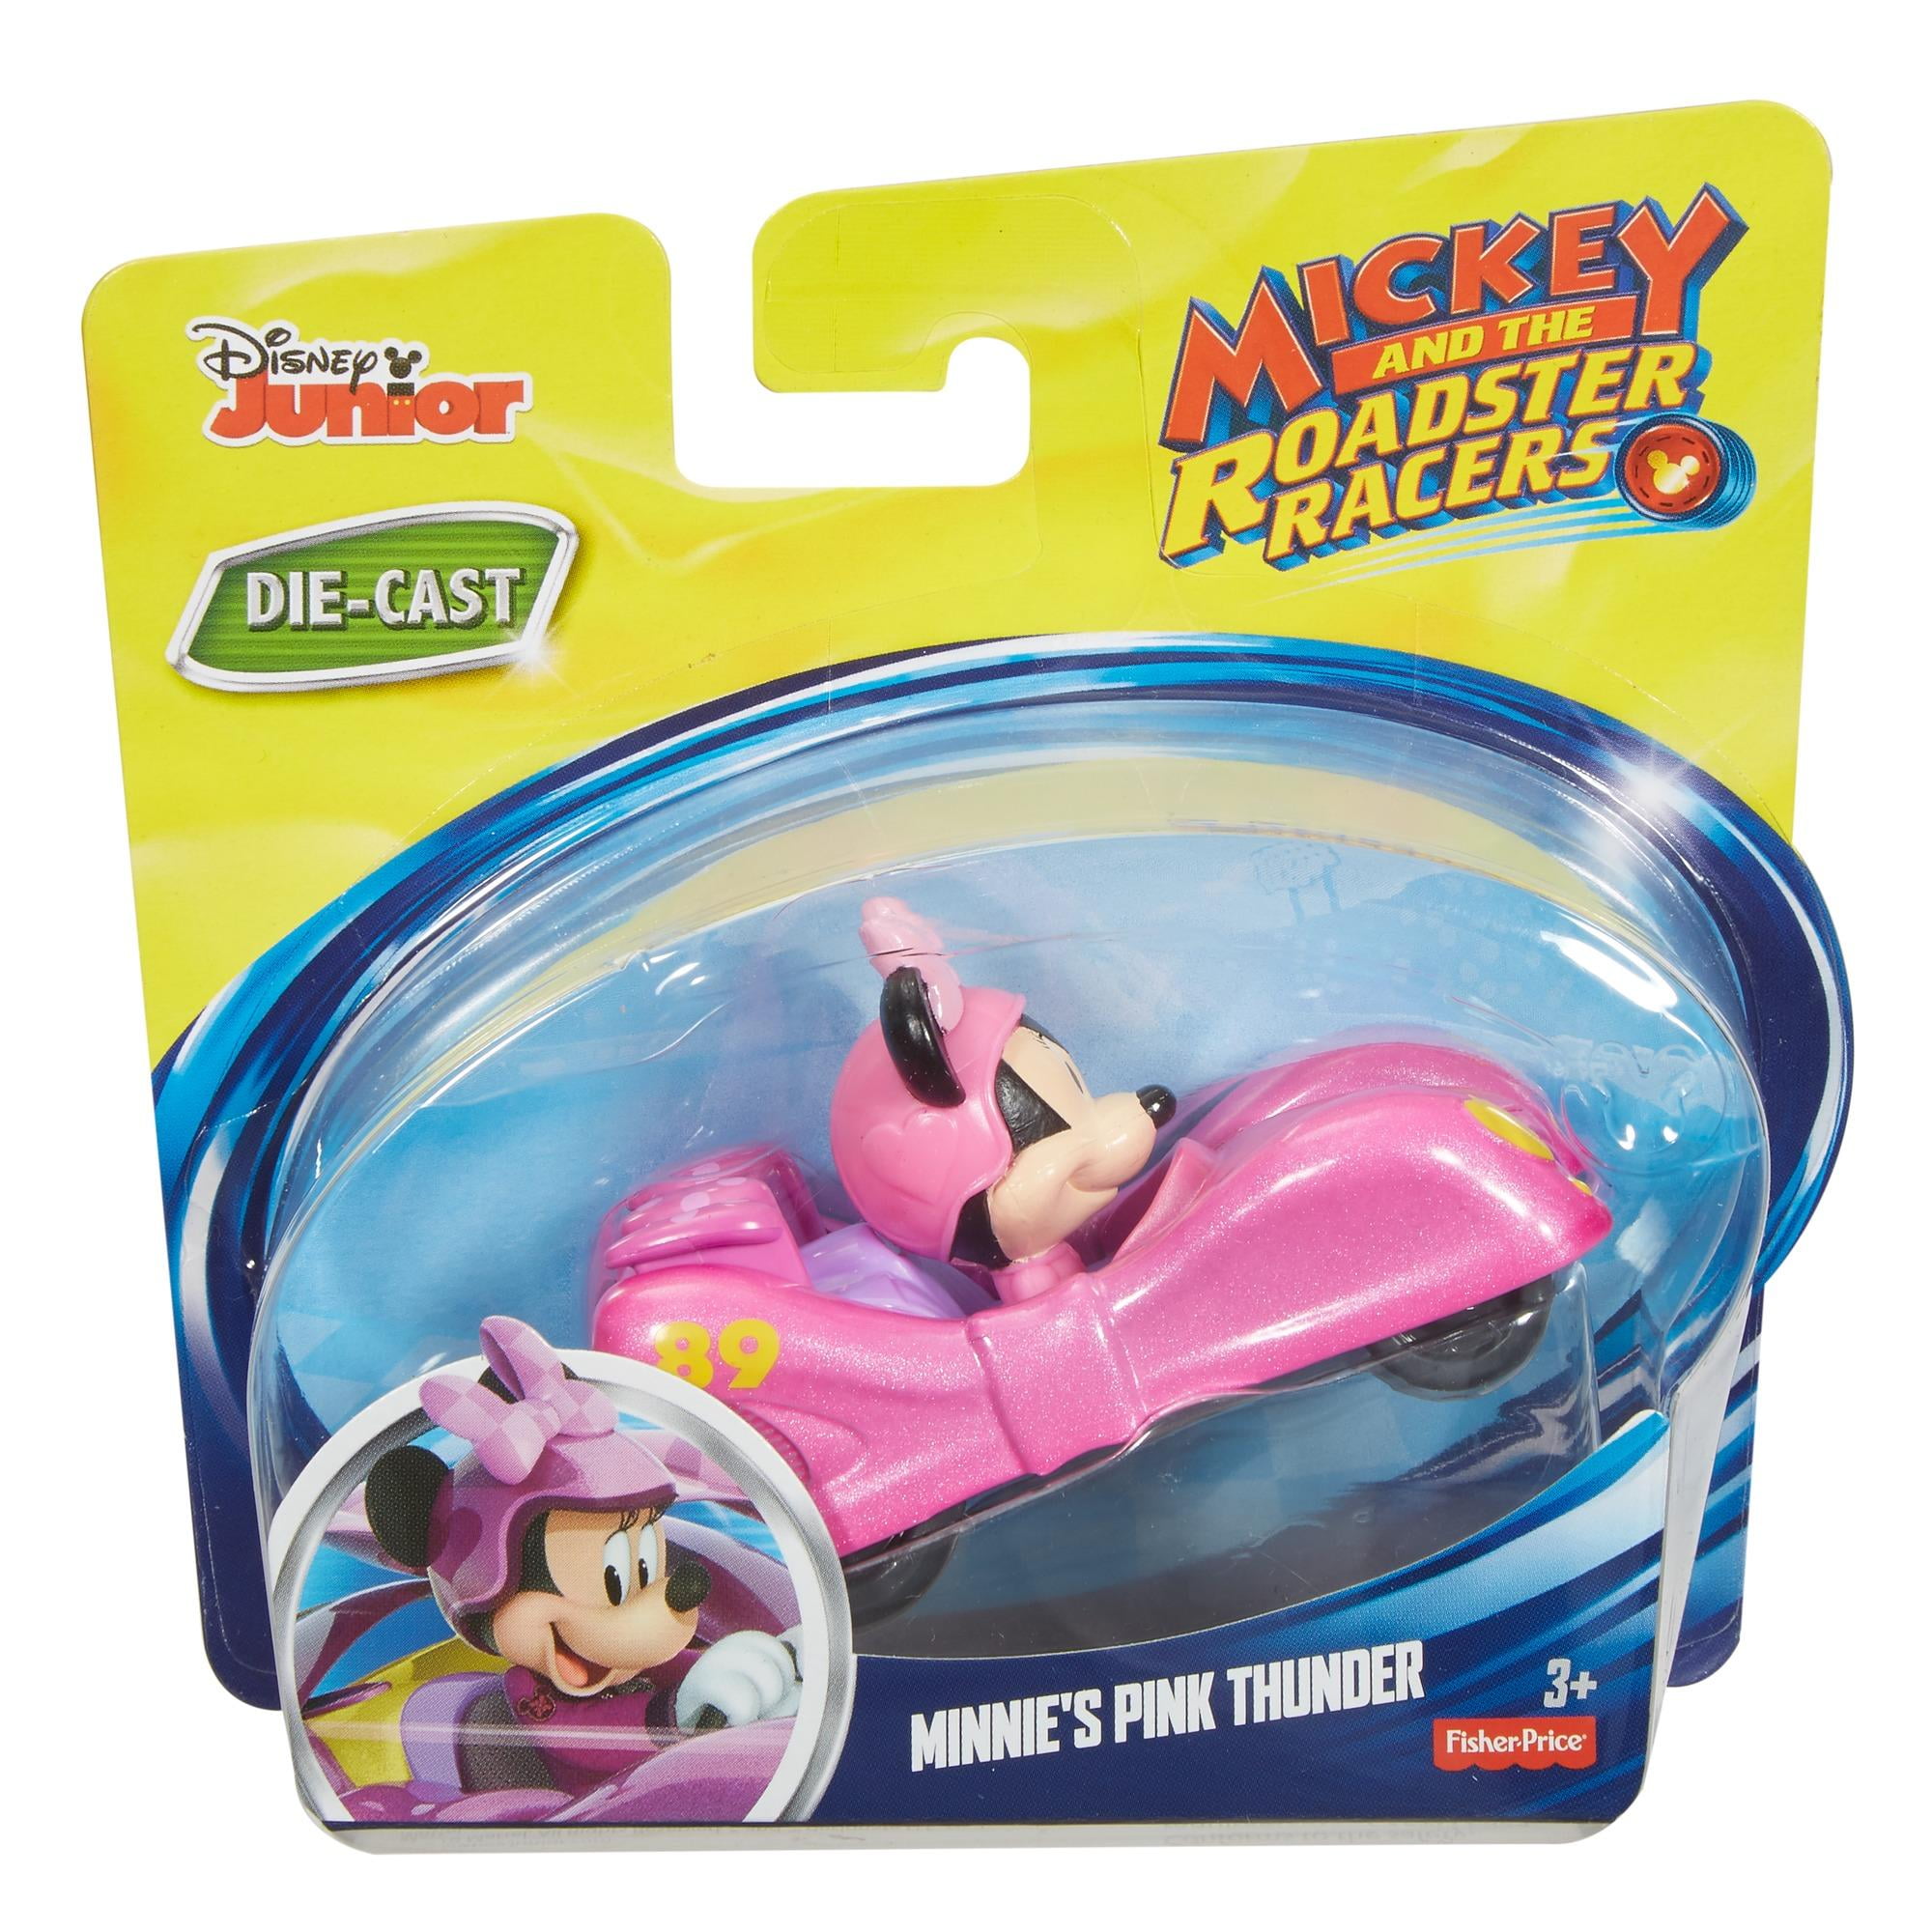 Disney Junior Mickey and The Roadster Racers Die-cast Minnie's Pink Thunder for sale online 